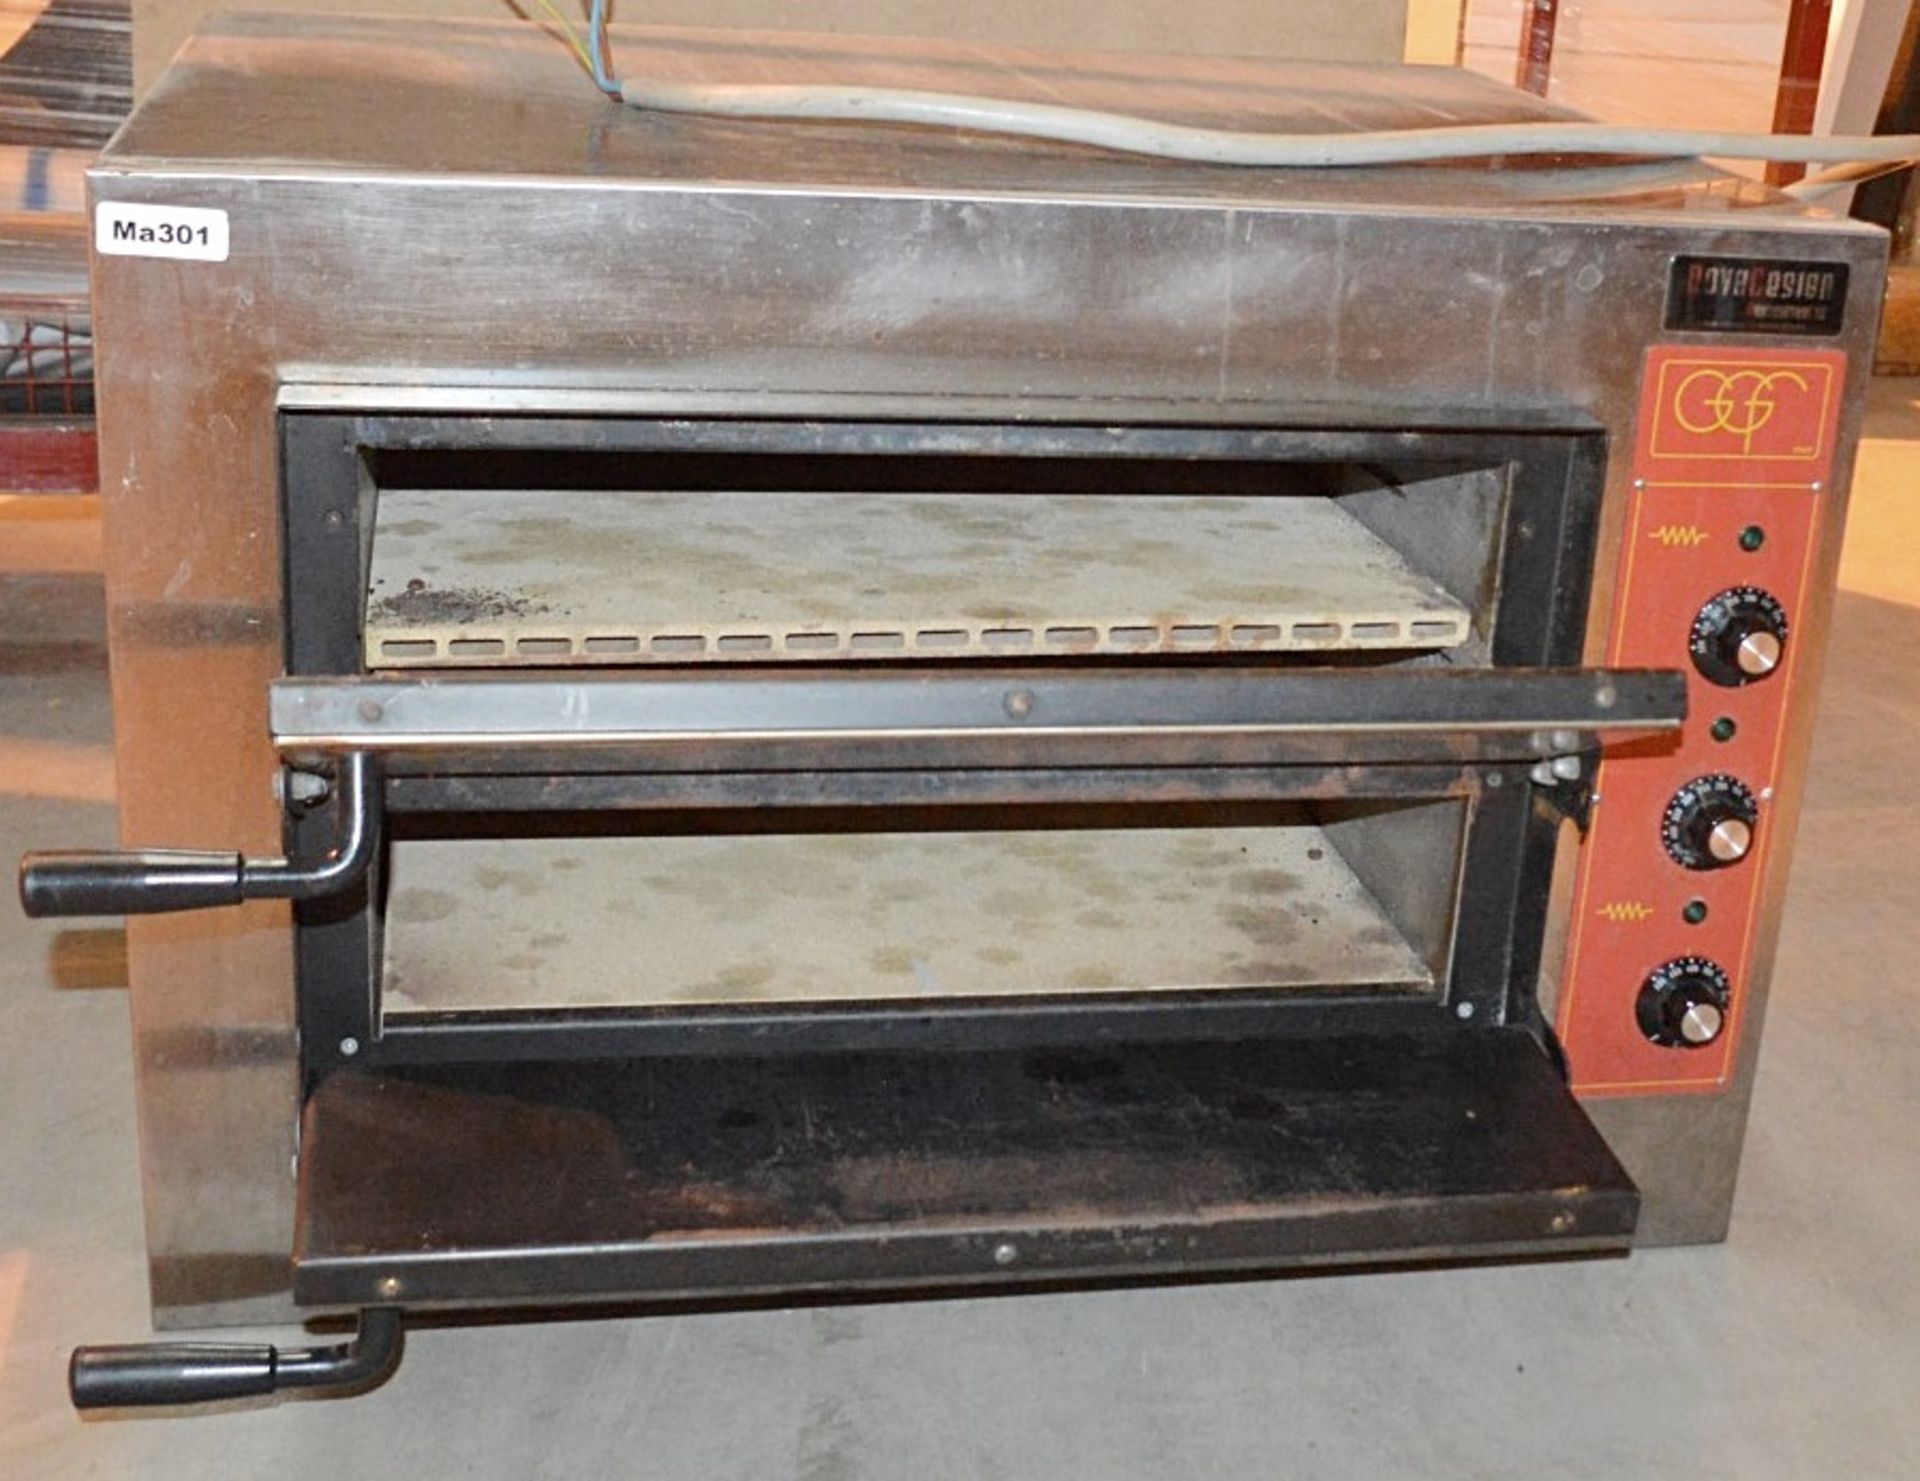 1 x Commercial Electric Built-in Pizza Oven With Fixed Rack (Model: Mini 3T) - Made In Italy - - Image 5 of 7